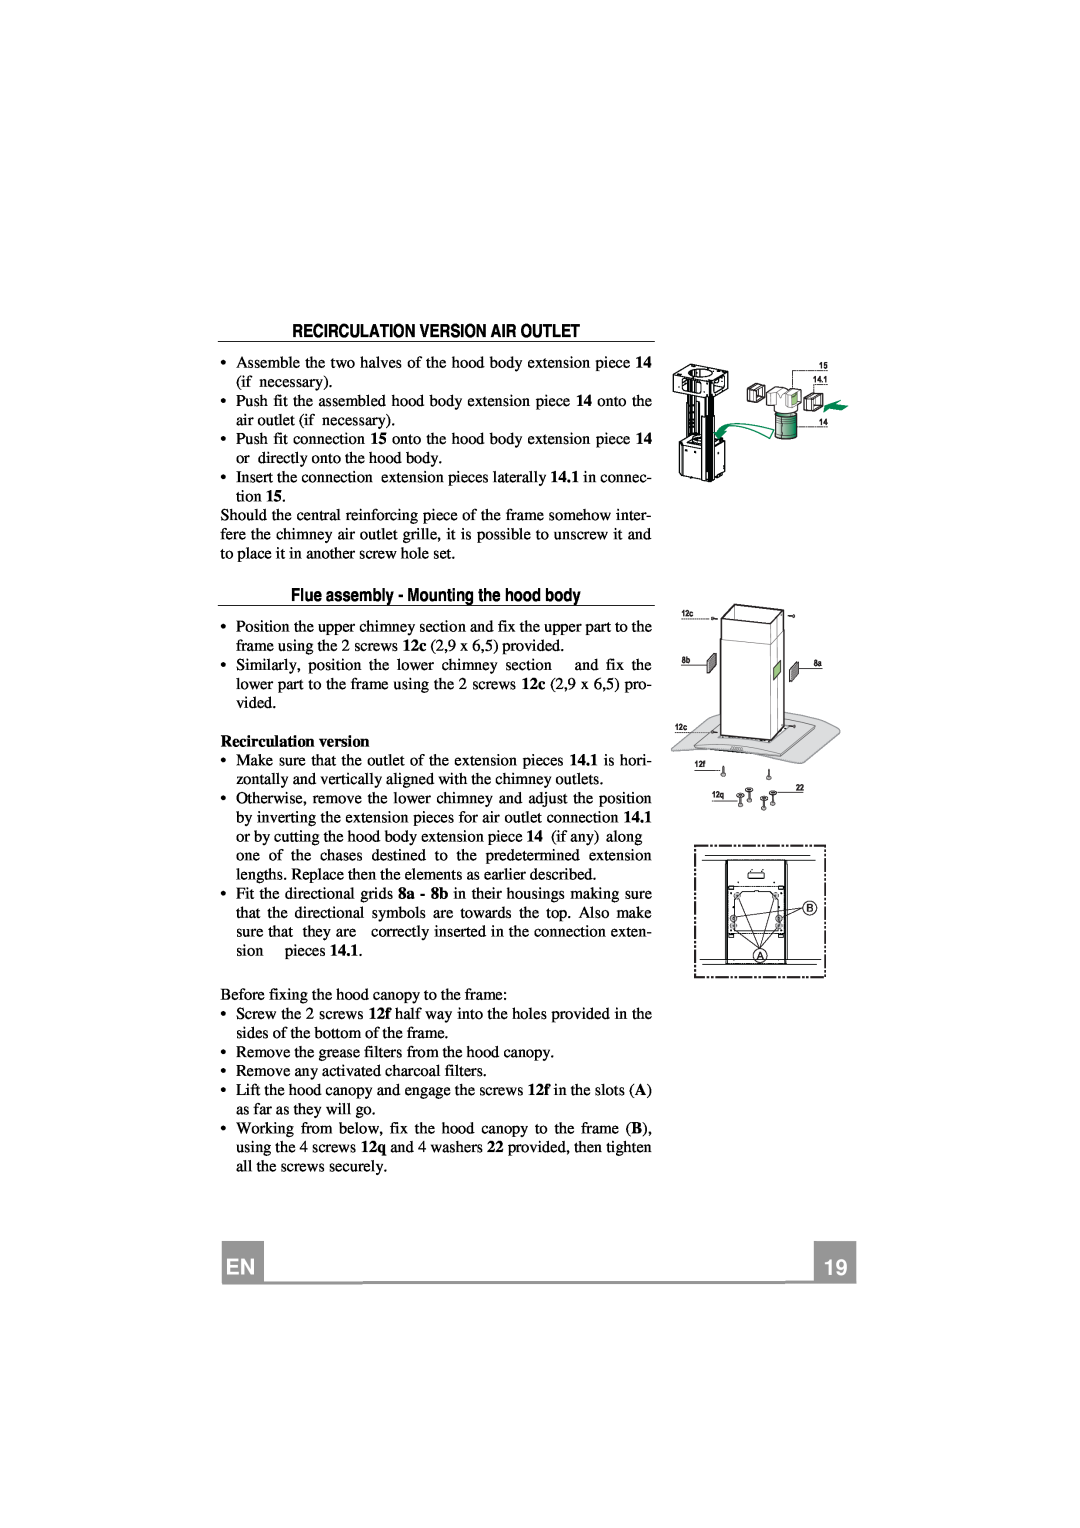 Smeg KIV90X manual Recirculation Version Air Outlet, Flue assembly - Mounting the hood body, Recirculation version 